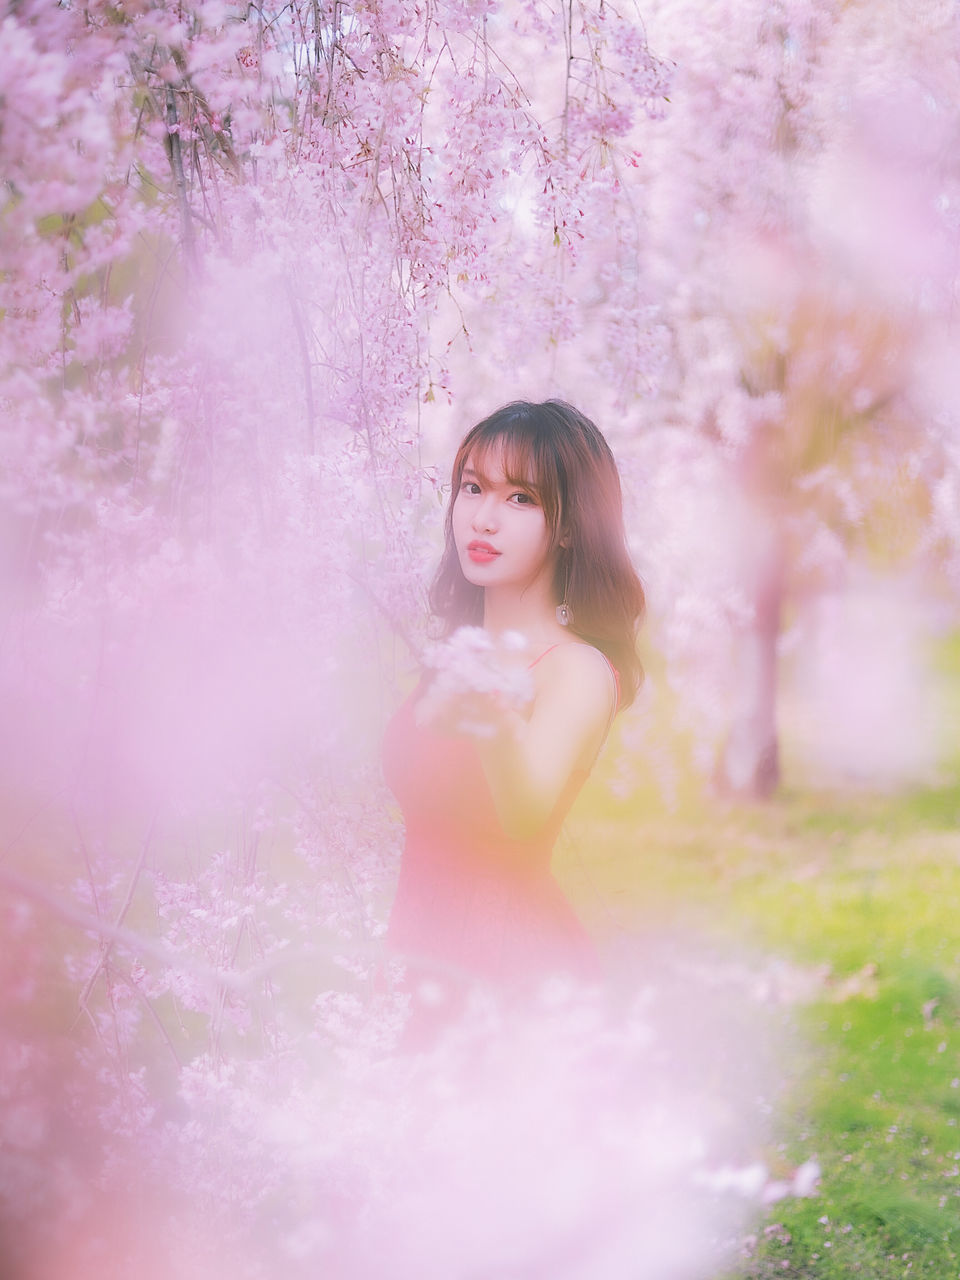 pink, one person, plant, women, nature, flower, flowering plant, young adult, beauty in nature, spring, tree, hairstyle, adult, fashion, springtime, blossom, portrait, long hair, clothing, freshness, pastel colored, dress, outdoors, selective focus, female, brown hair, ethereal, tranquility, grass, happiness, child, looking, smiling, fragility, contemplation, sunlight, fantasy, cherry blossom, standing, relaxation, emotion, summer, land, day, lifestyles, dreamlike, daydreaming, copy space, environment, elegance, innocence, cute, field, meadow